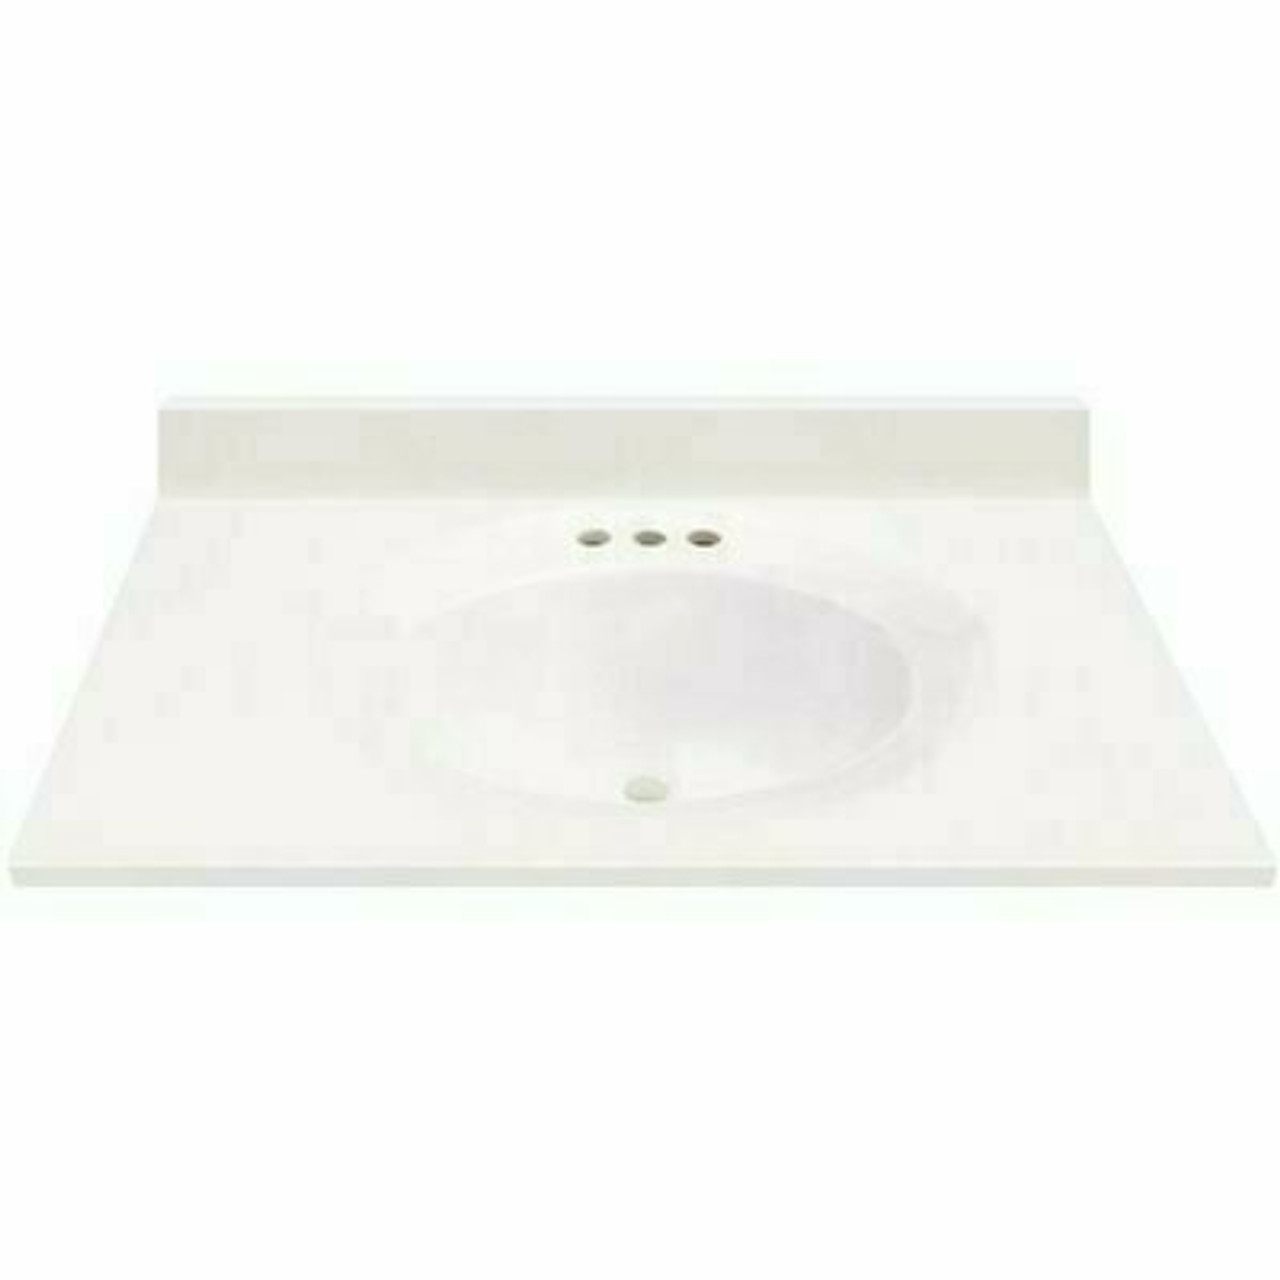 Magickwoods 37 In. W X 19 In. D Cultured Marble Oval Recessed Single Basin Vanity Top In White With White Basin